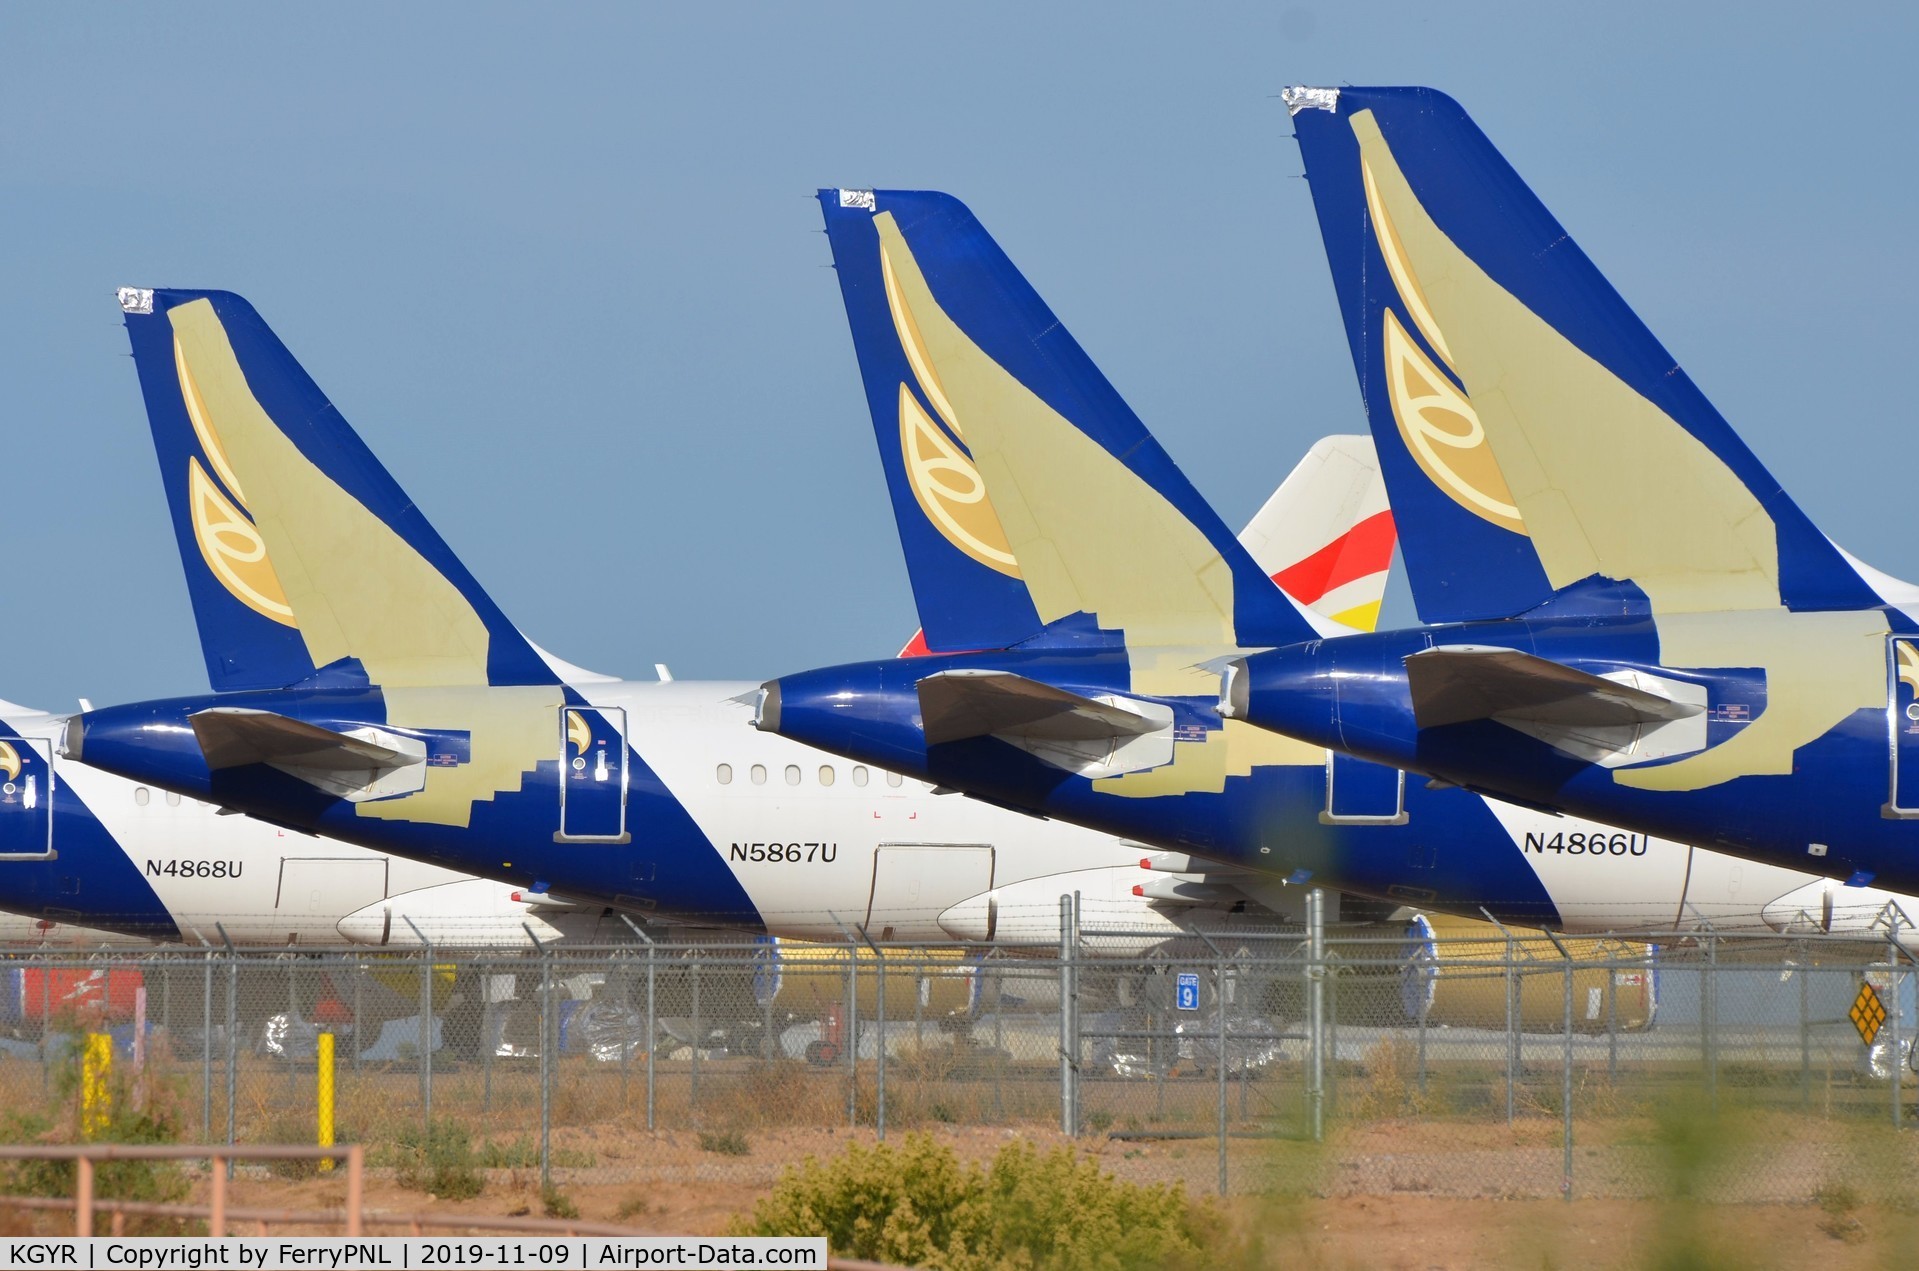 Phoenix Goodyear Airport (GYR) - United is the new owner of these former Shaheen A319's